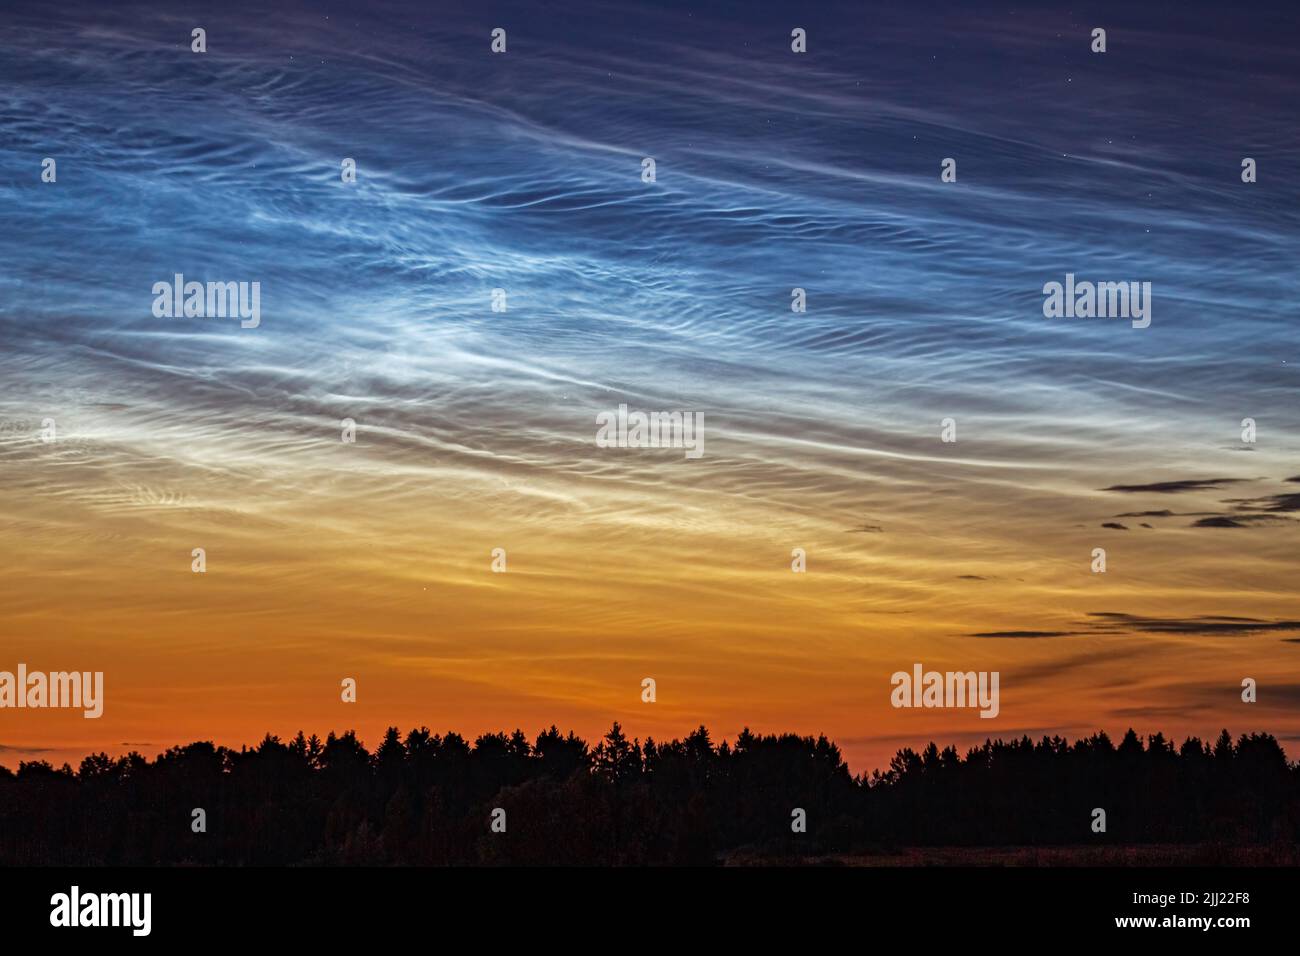 Night shining - Noctilucent clouds at night Stock Photo